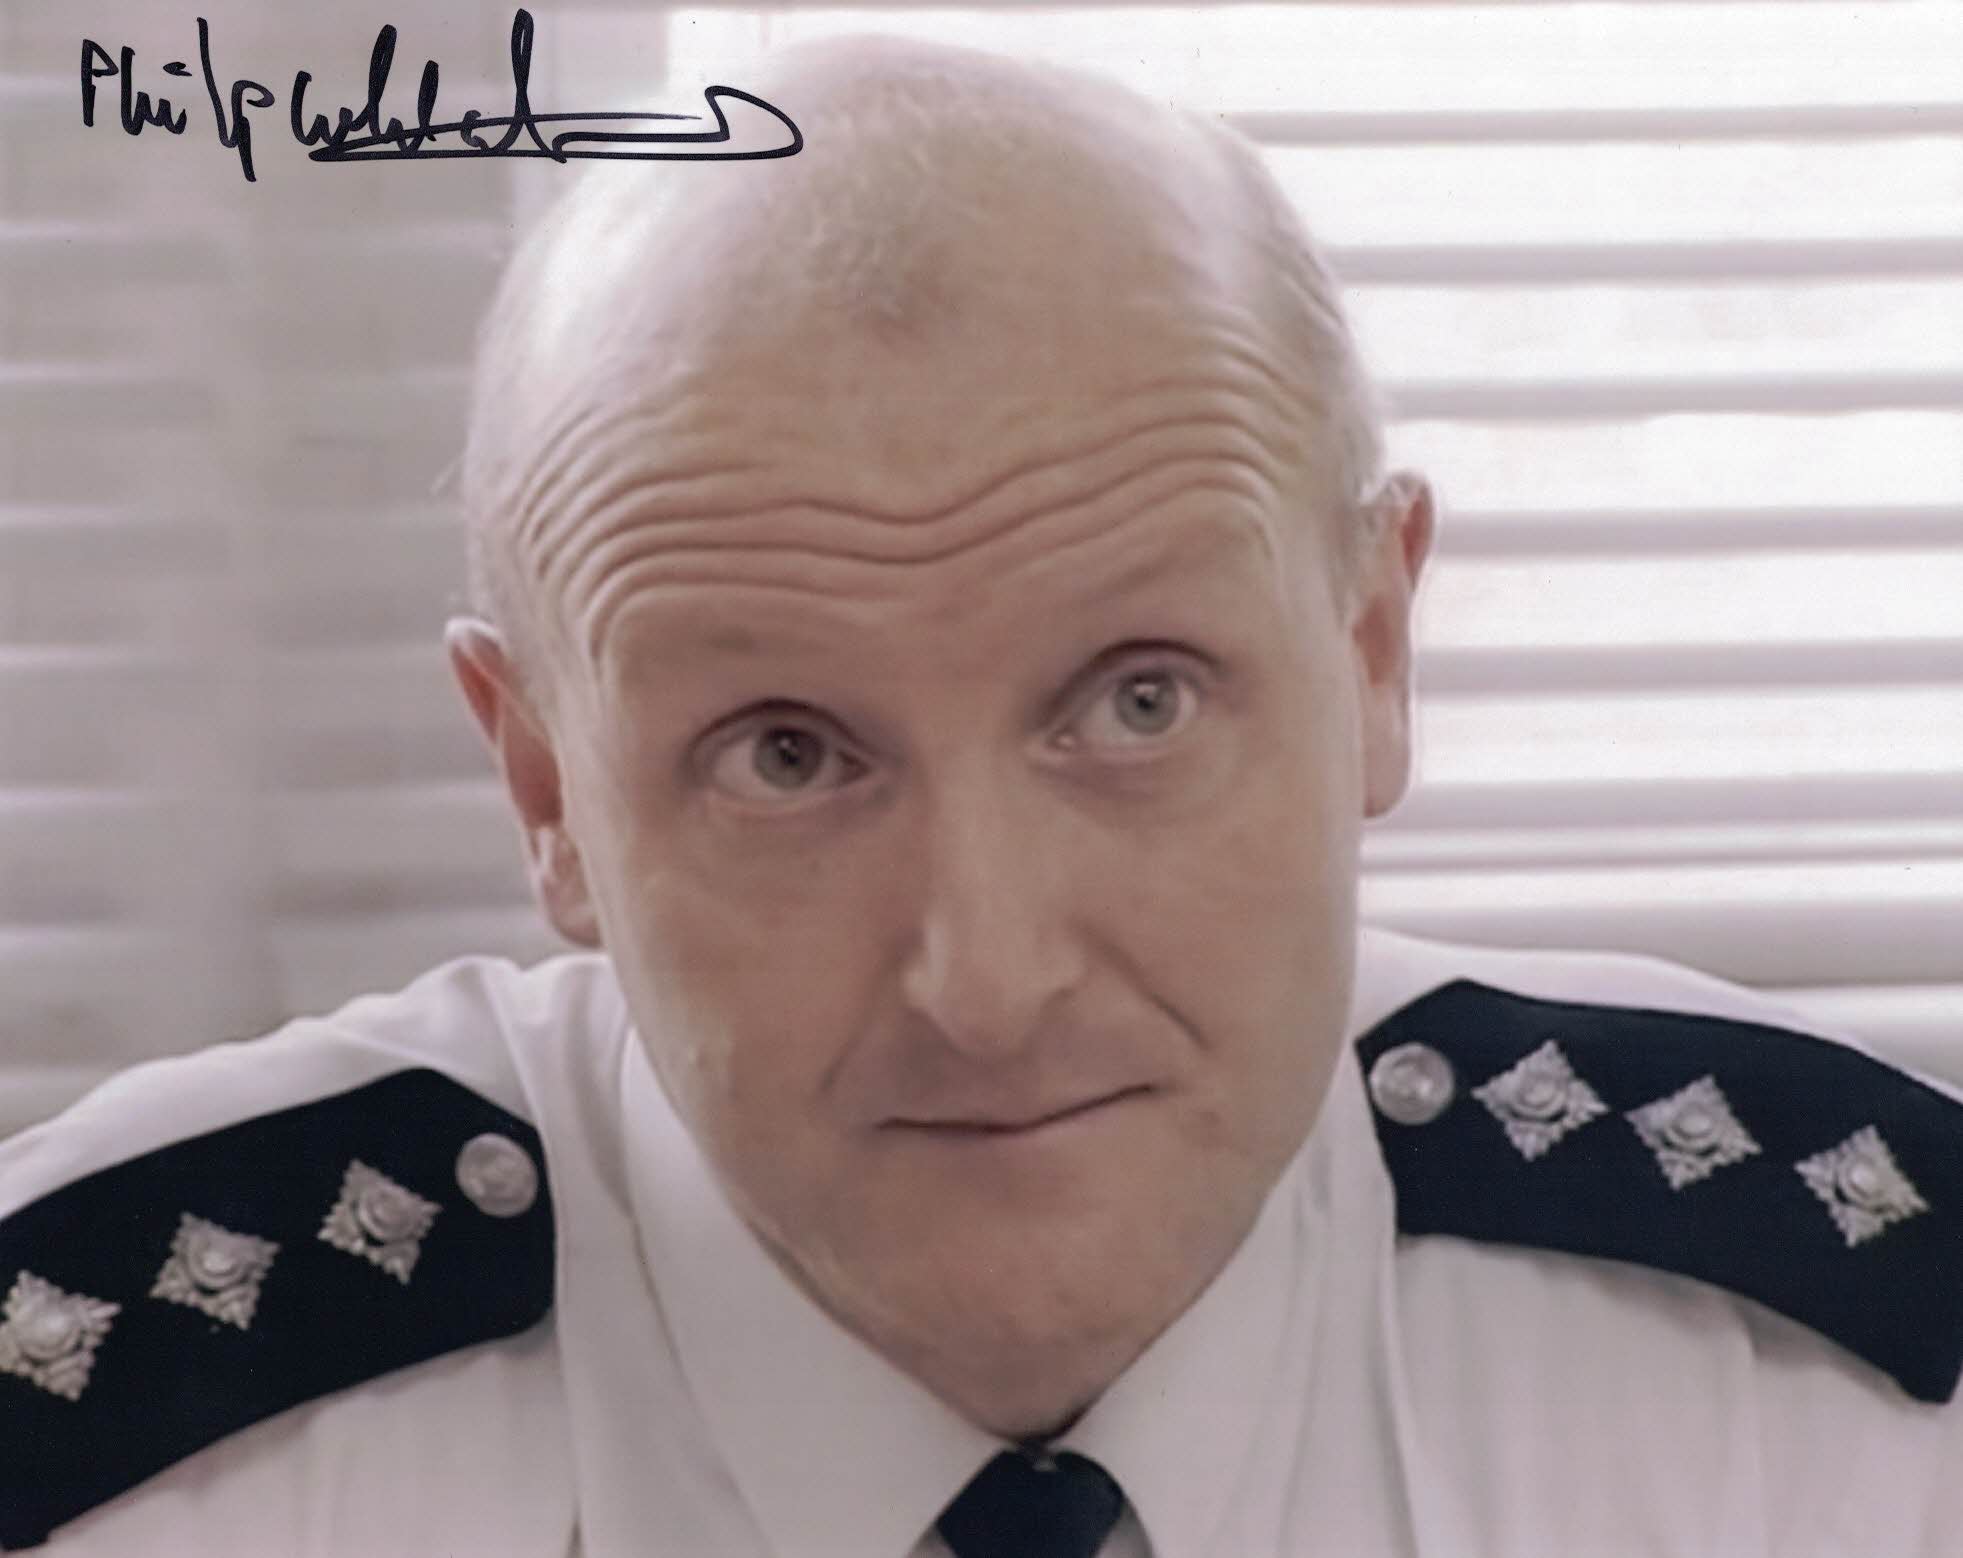 PHILIP WHITCHURCH - Chief Inspector Cato in The Bill - hand signed 10 x 8 photo